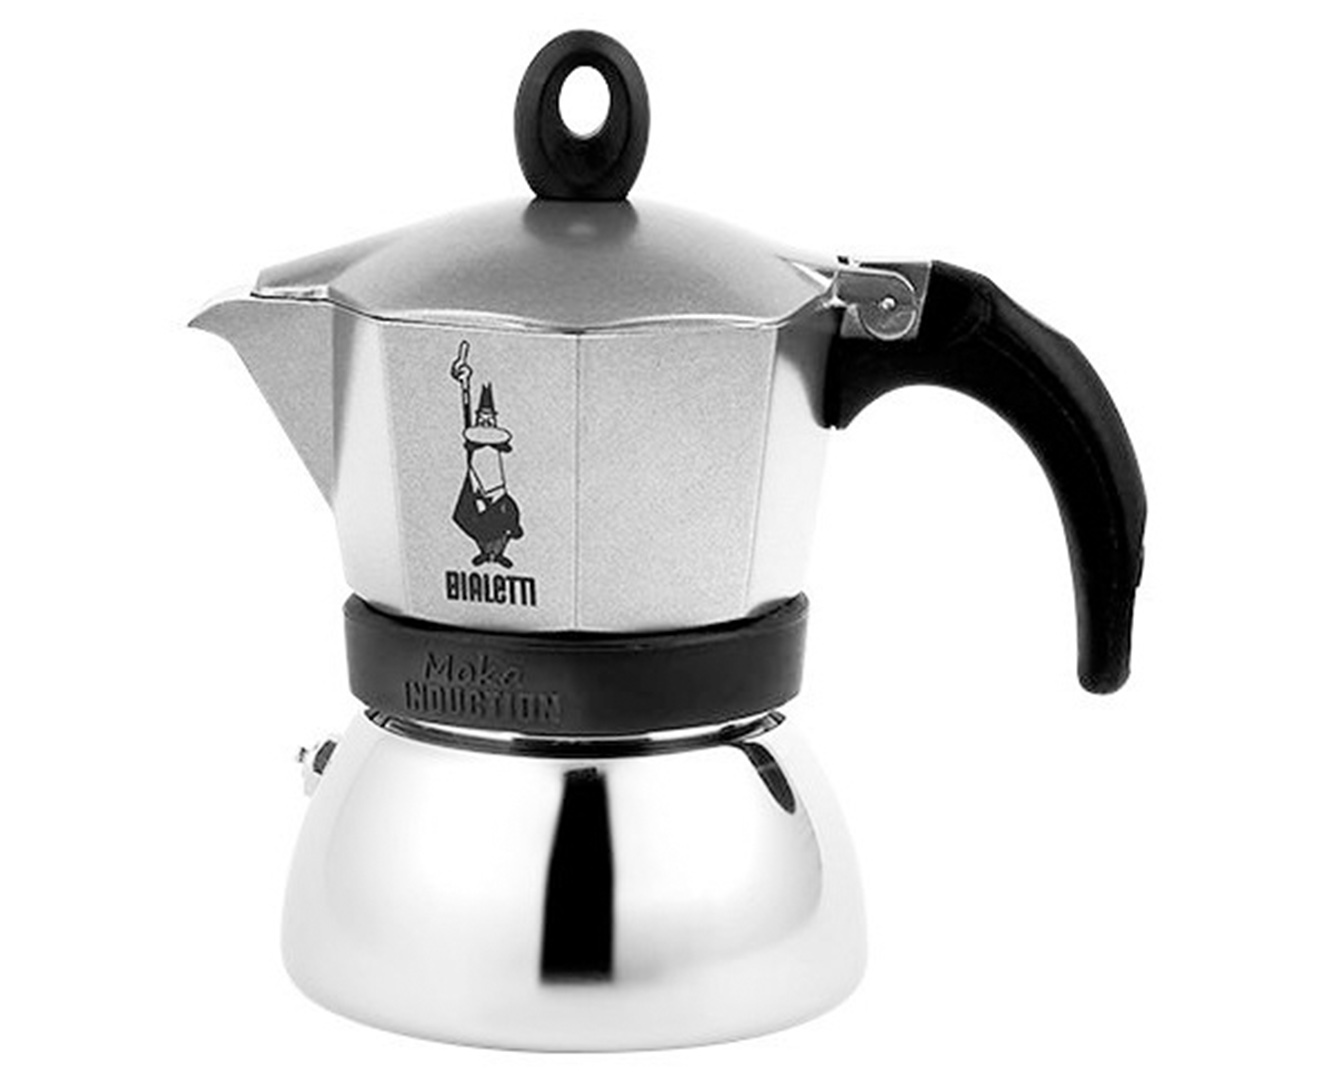 bialetti-3-cup-moka-induction-stovetop-espresso-maker-catch-co-nz